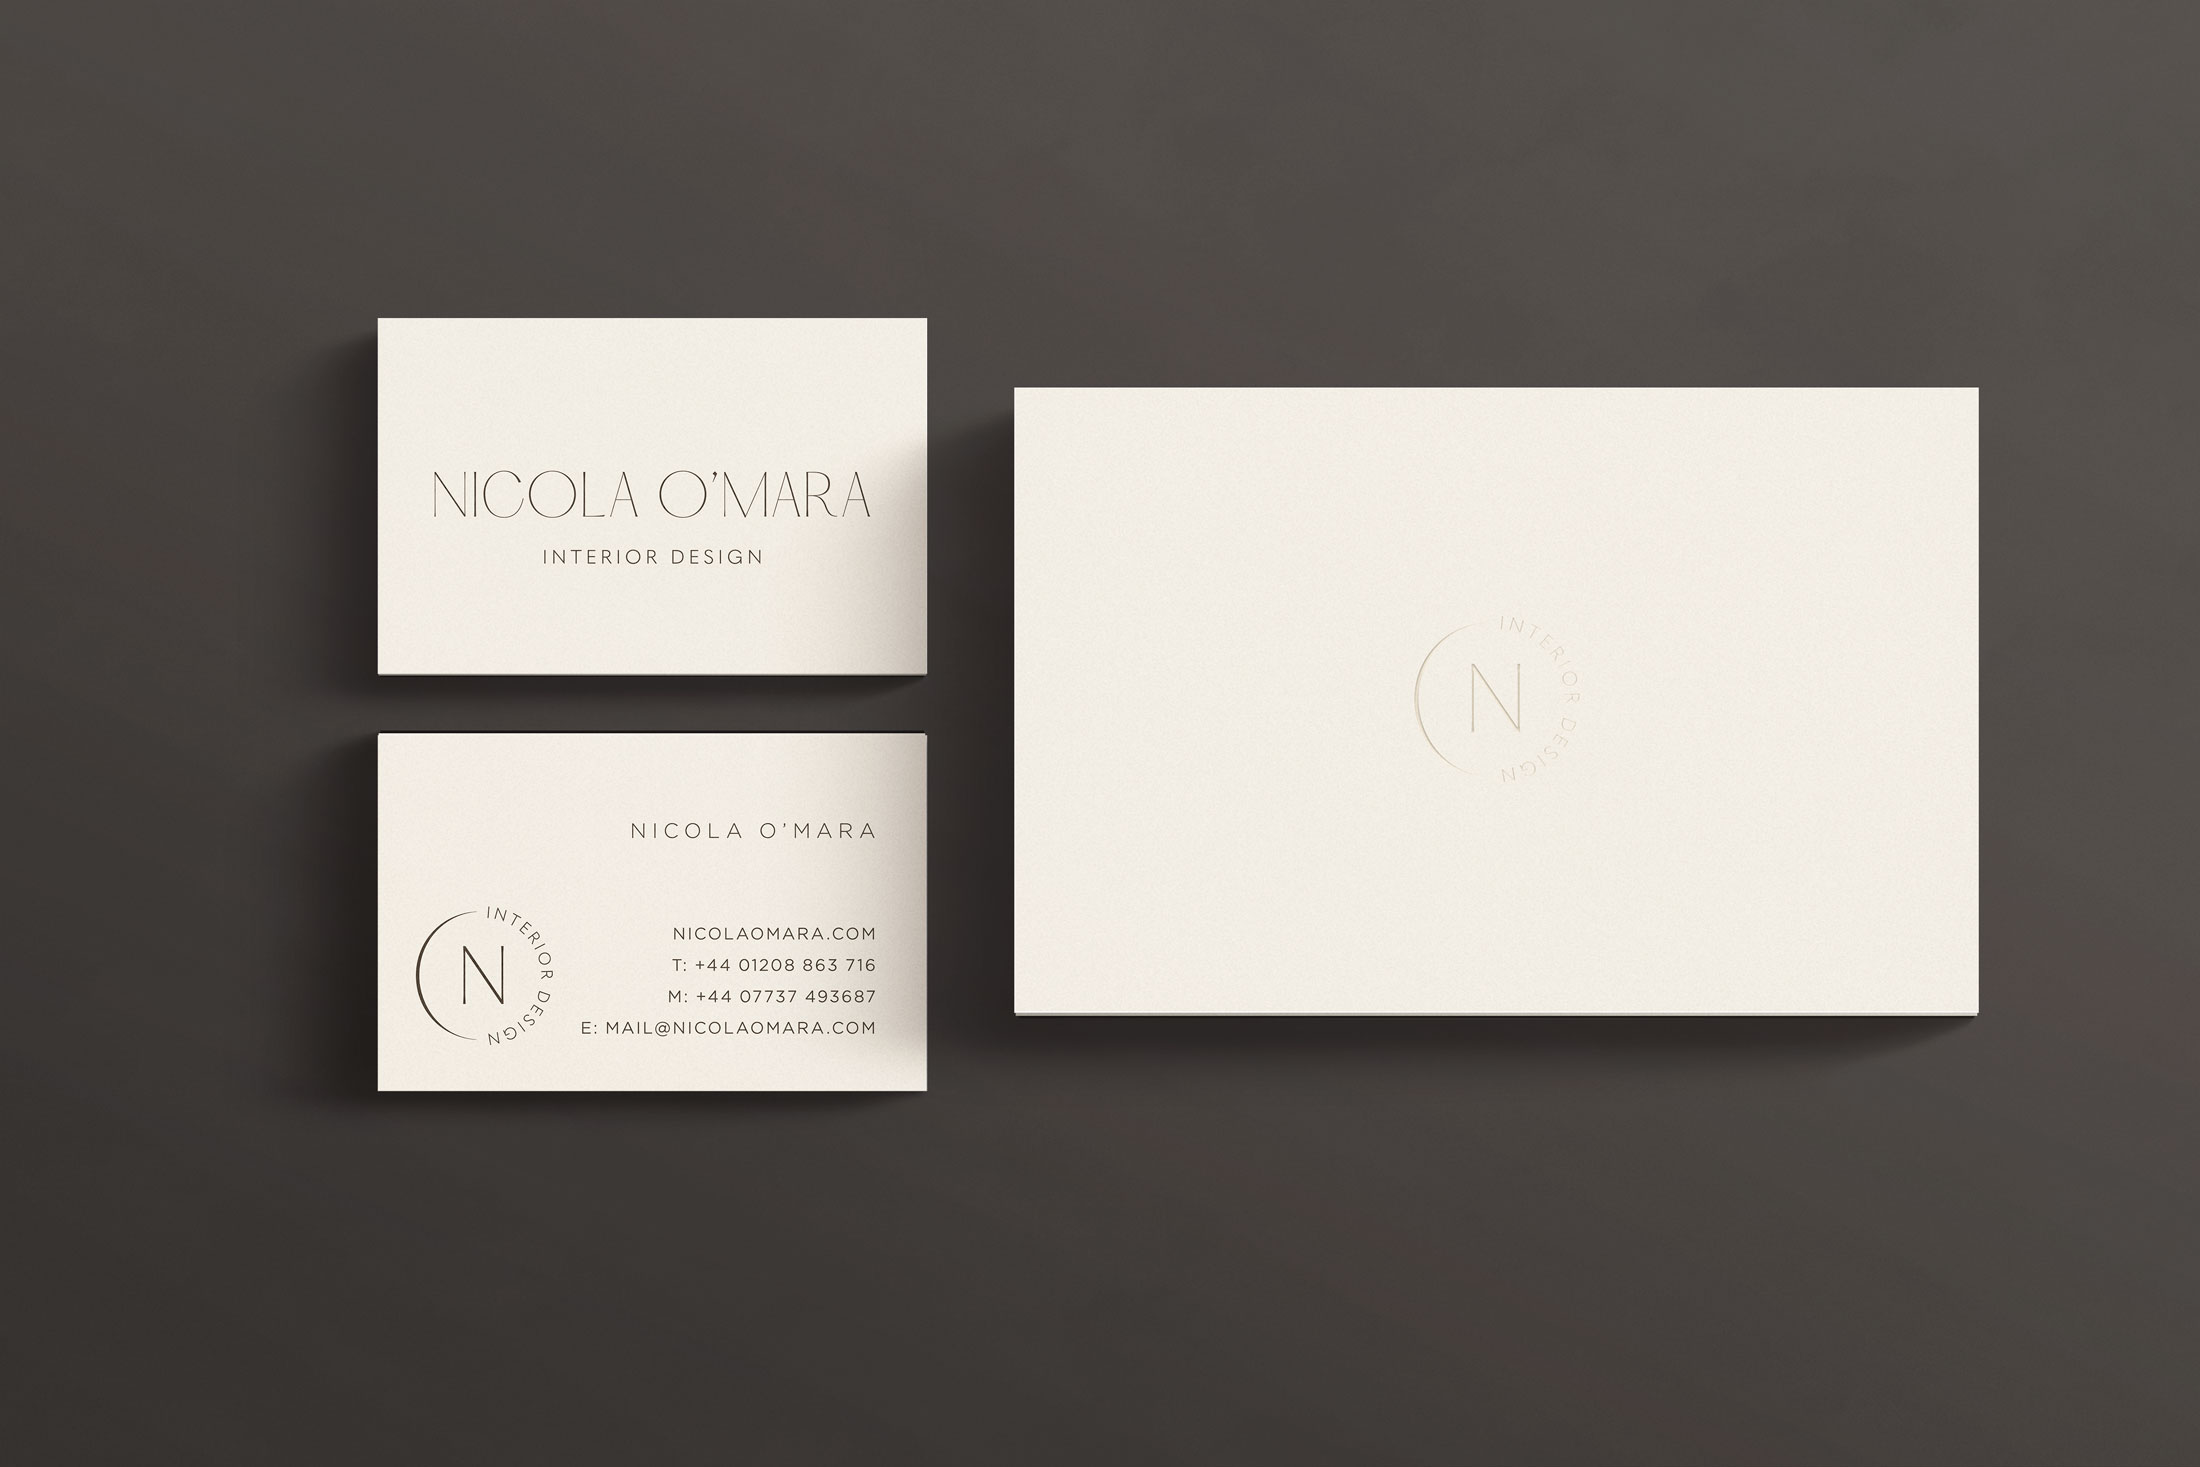 stationery design for Nicola O'Mara showing a business card and postcard